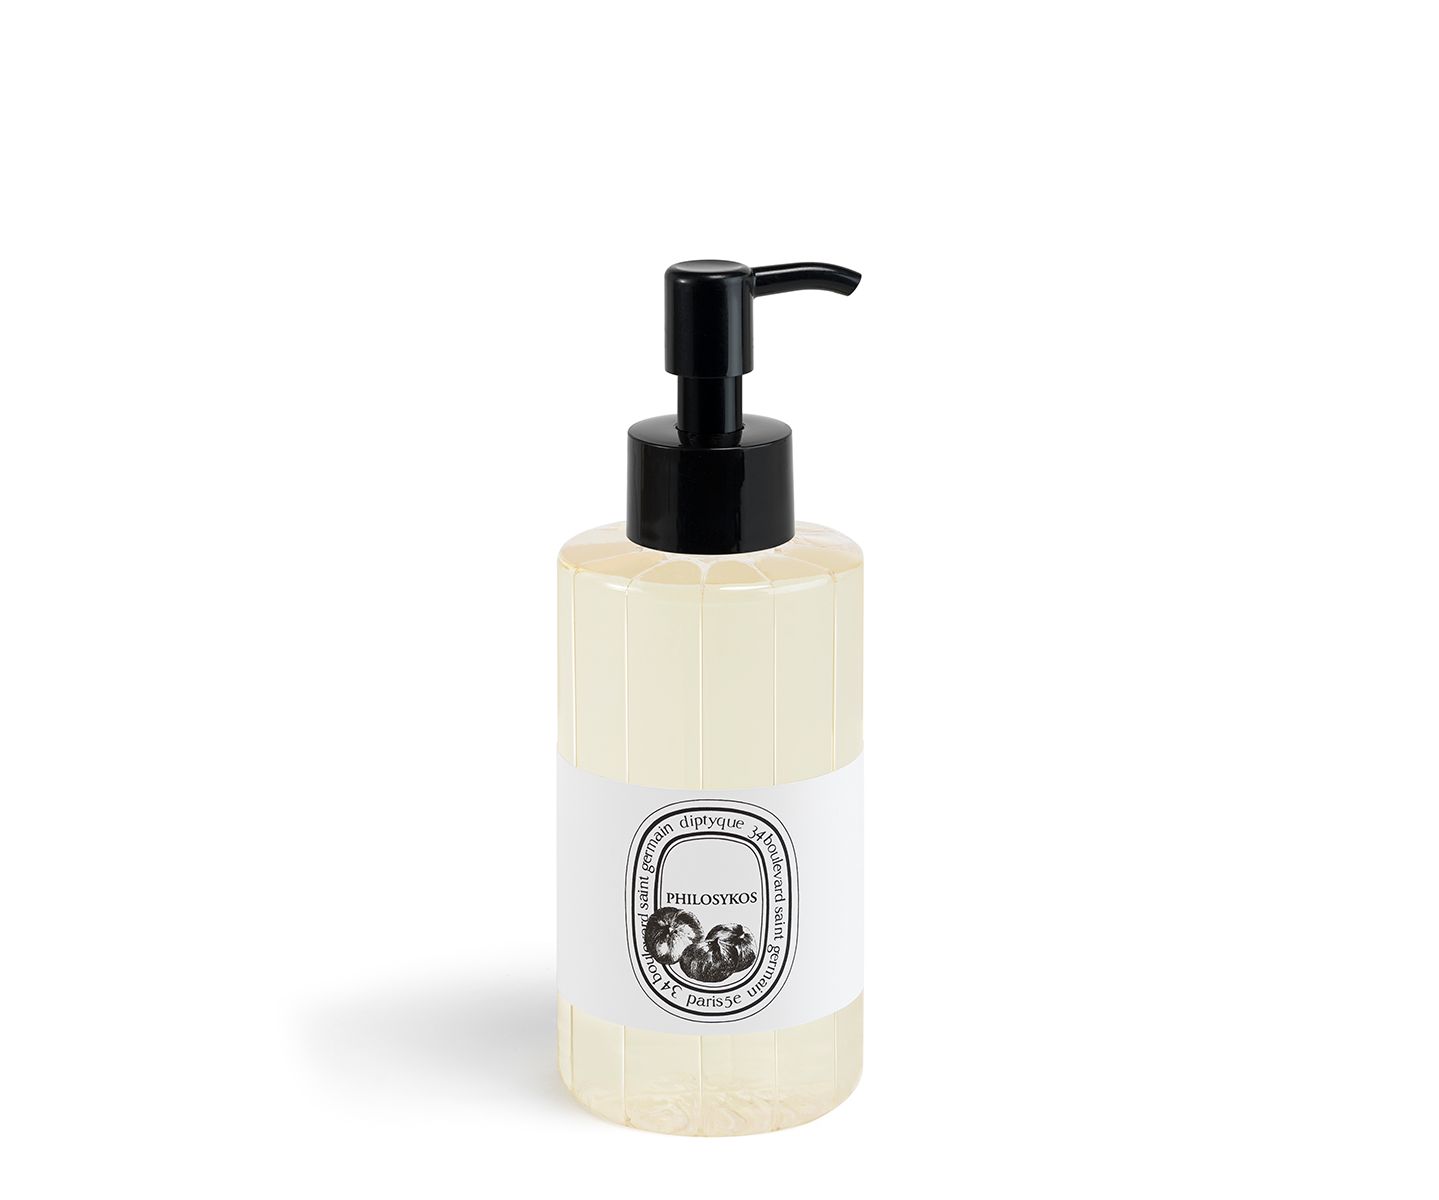 Philosykos Cleansing Hand and Body Gel | Diptyque (UK)